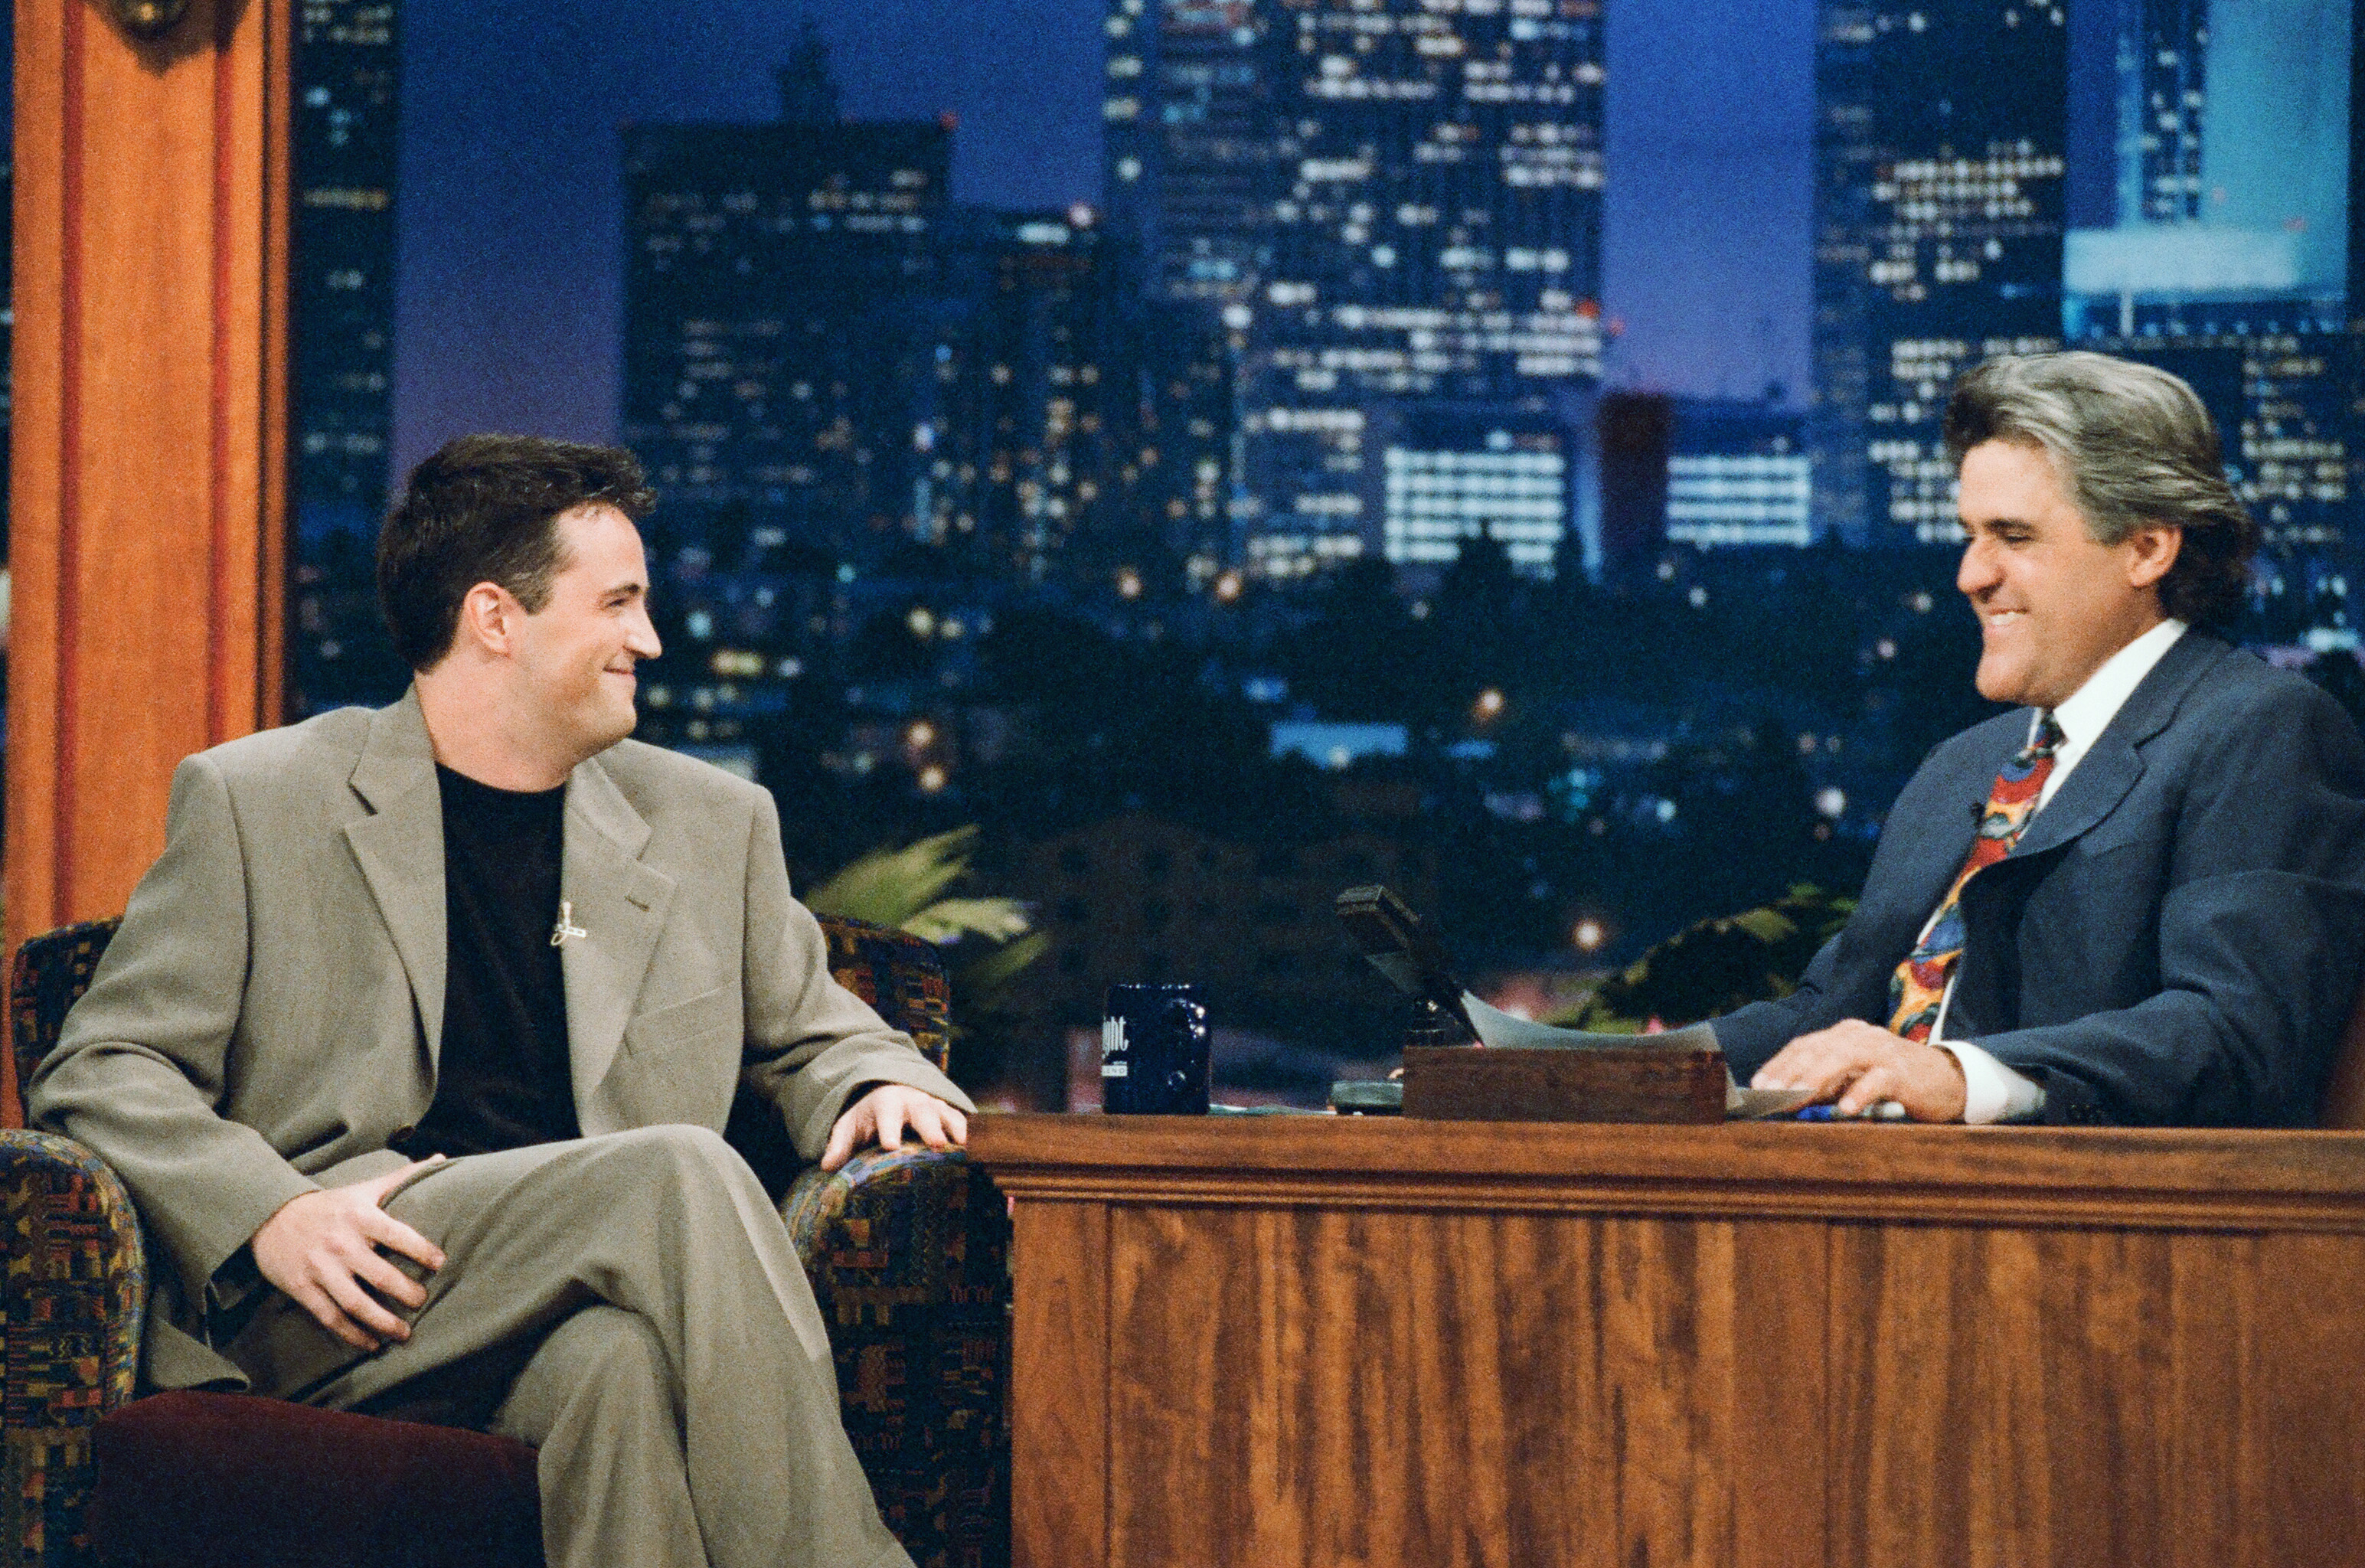 Matthew Perry during an appearance on "The Tonight Show with Jay Leno" on August 30, 1995. | Source: Getty Images